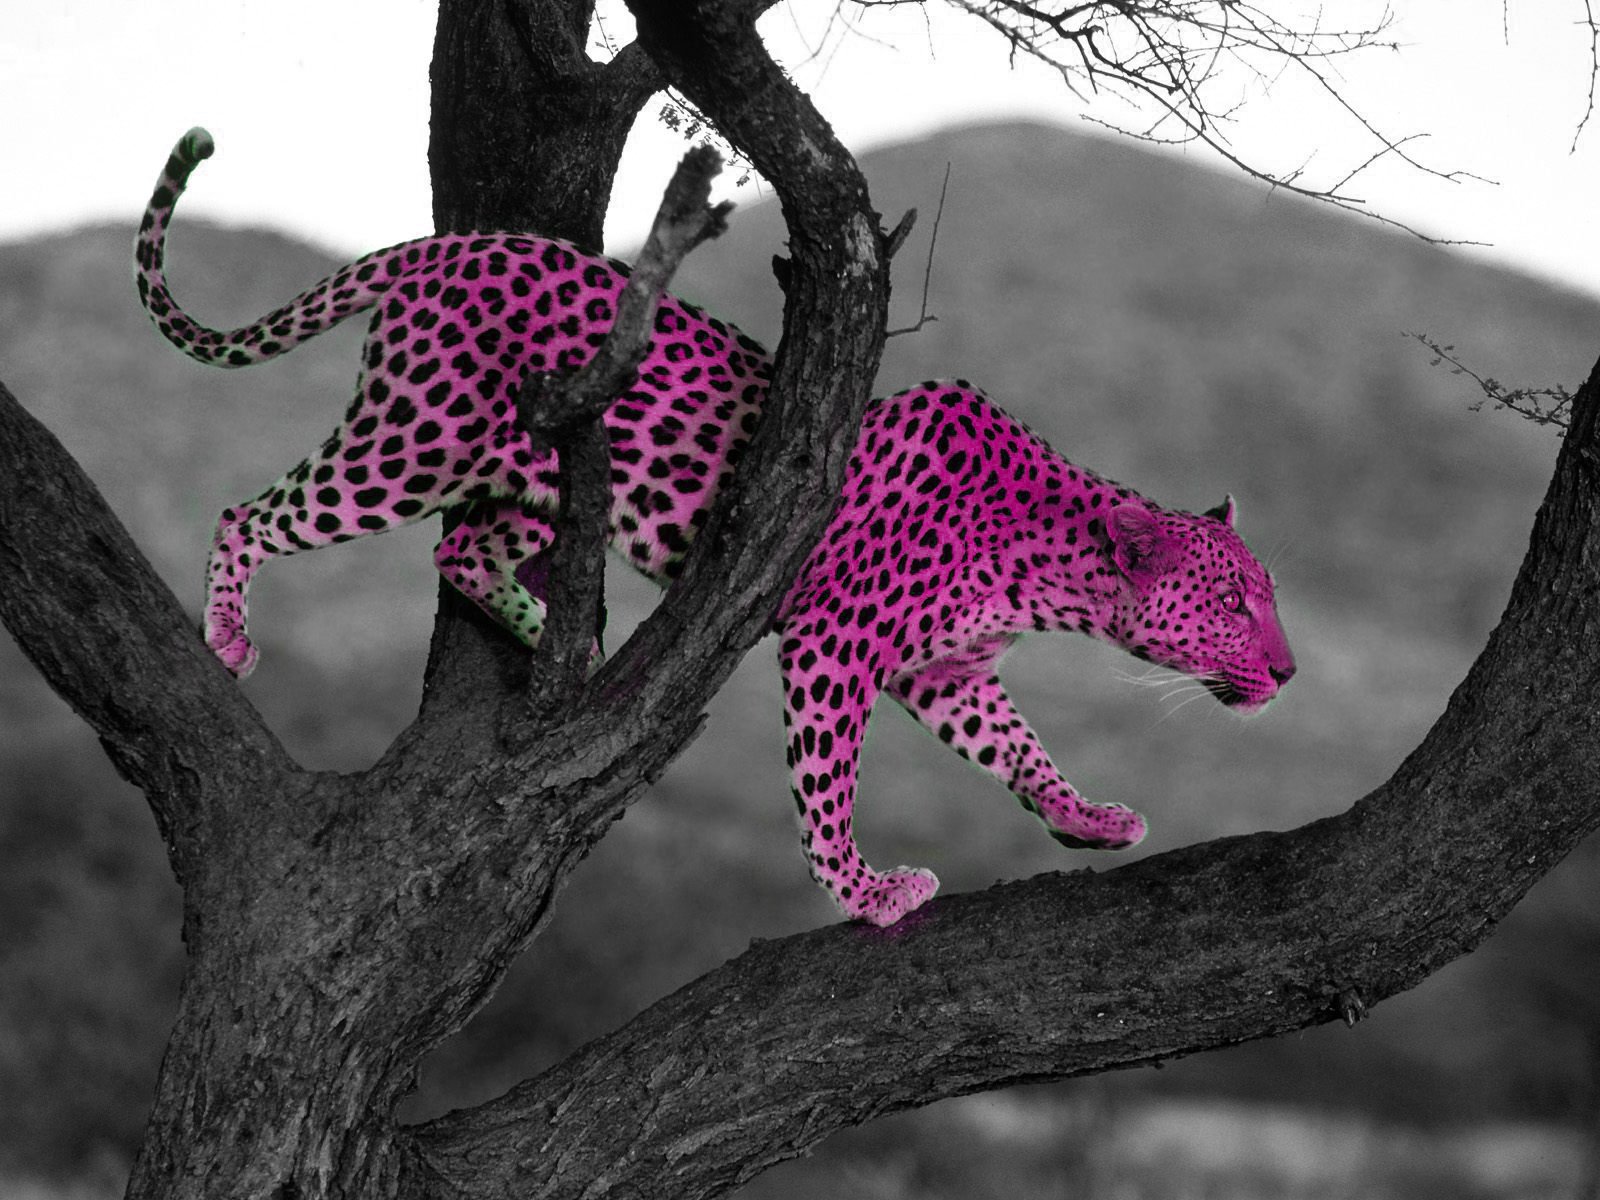 trees, Animals, Leopards, Selective, Coloring, Spotted Wallpaper